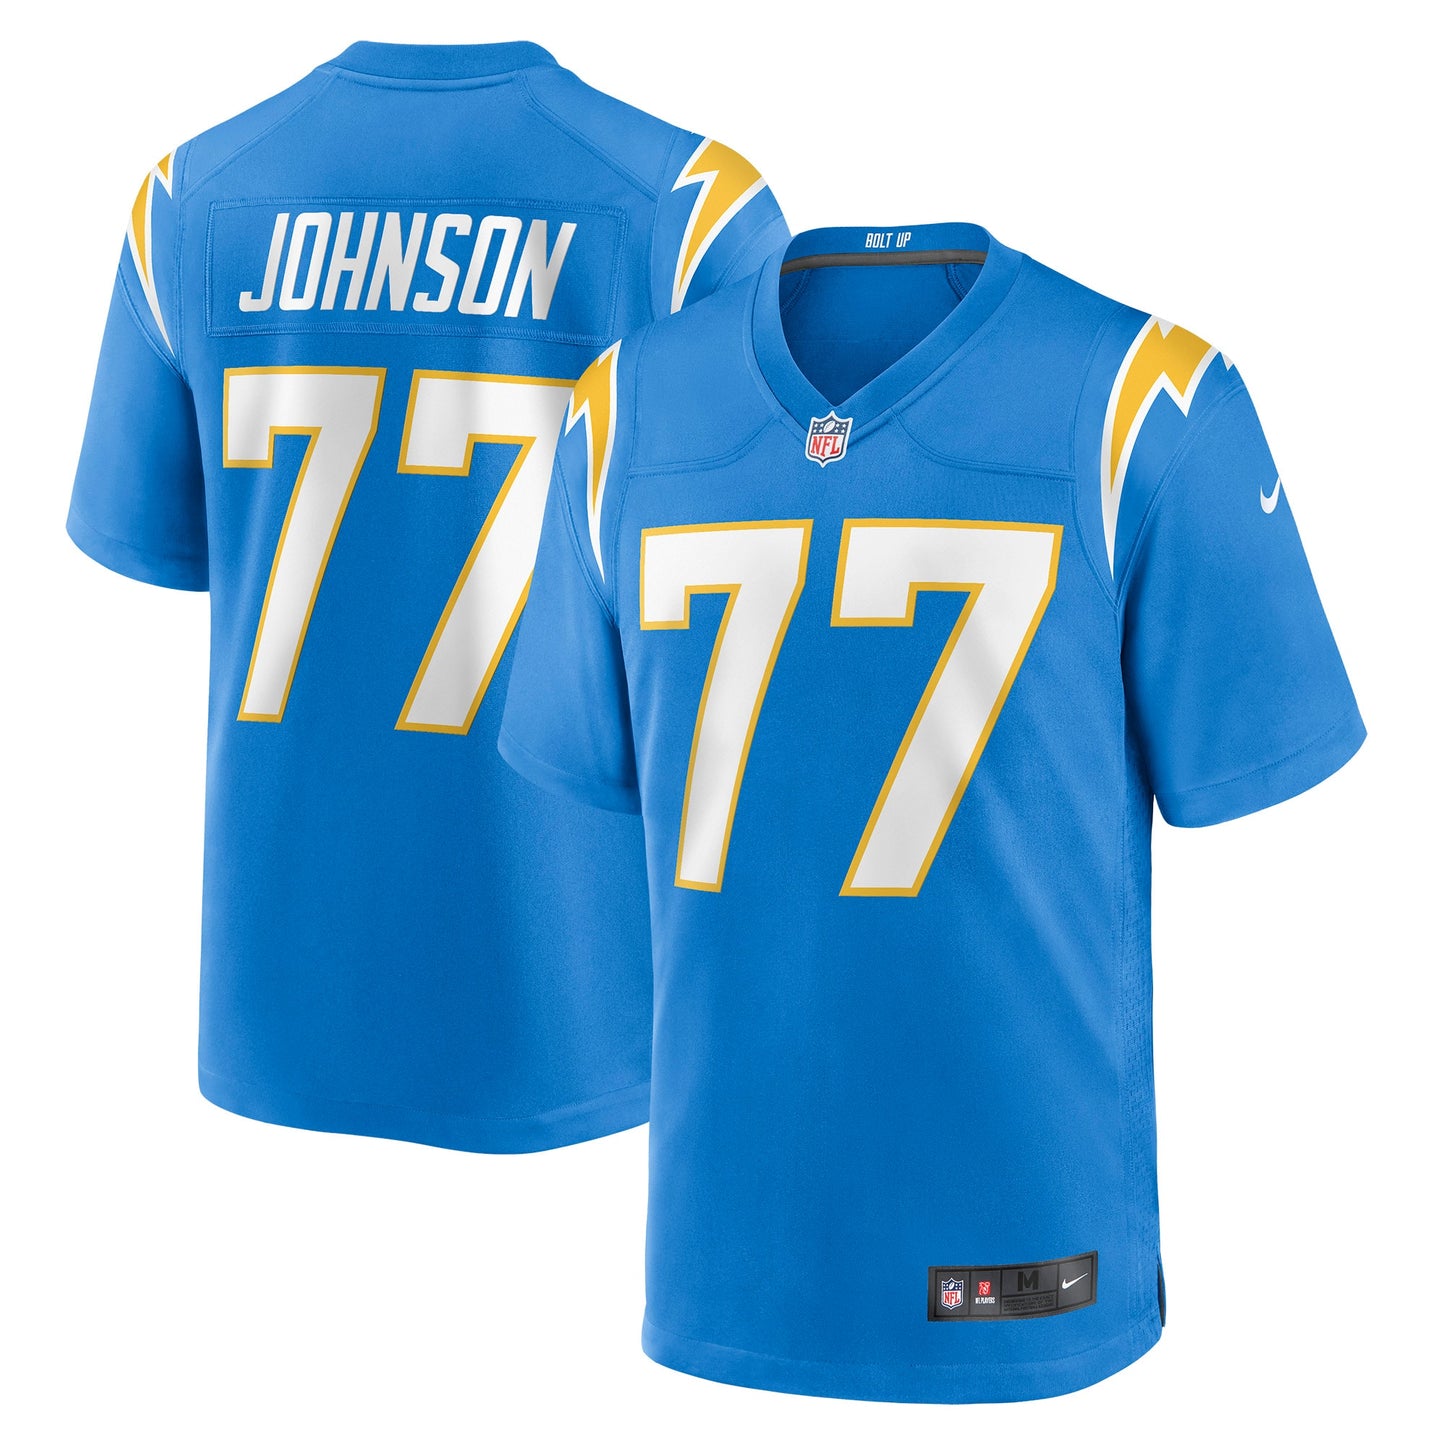 Zion Johnson Los Angeles Chargers Nike Player Game Jersey - Powder Blue